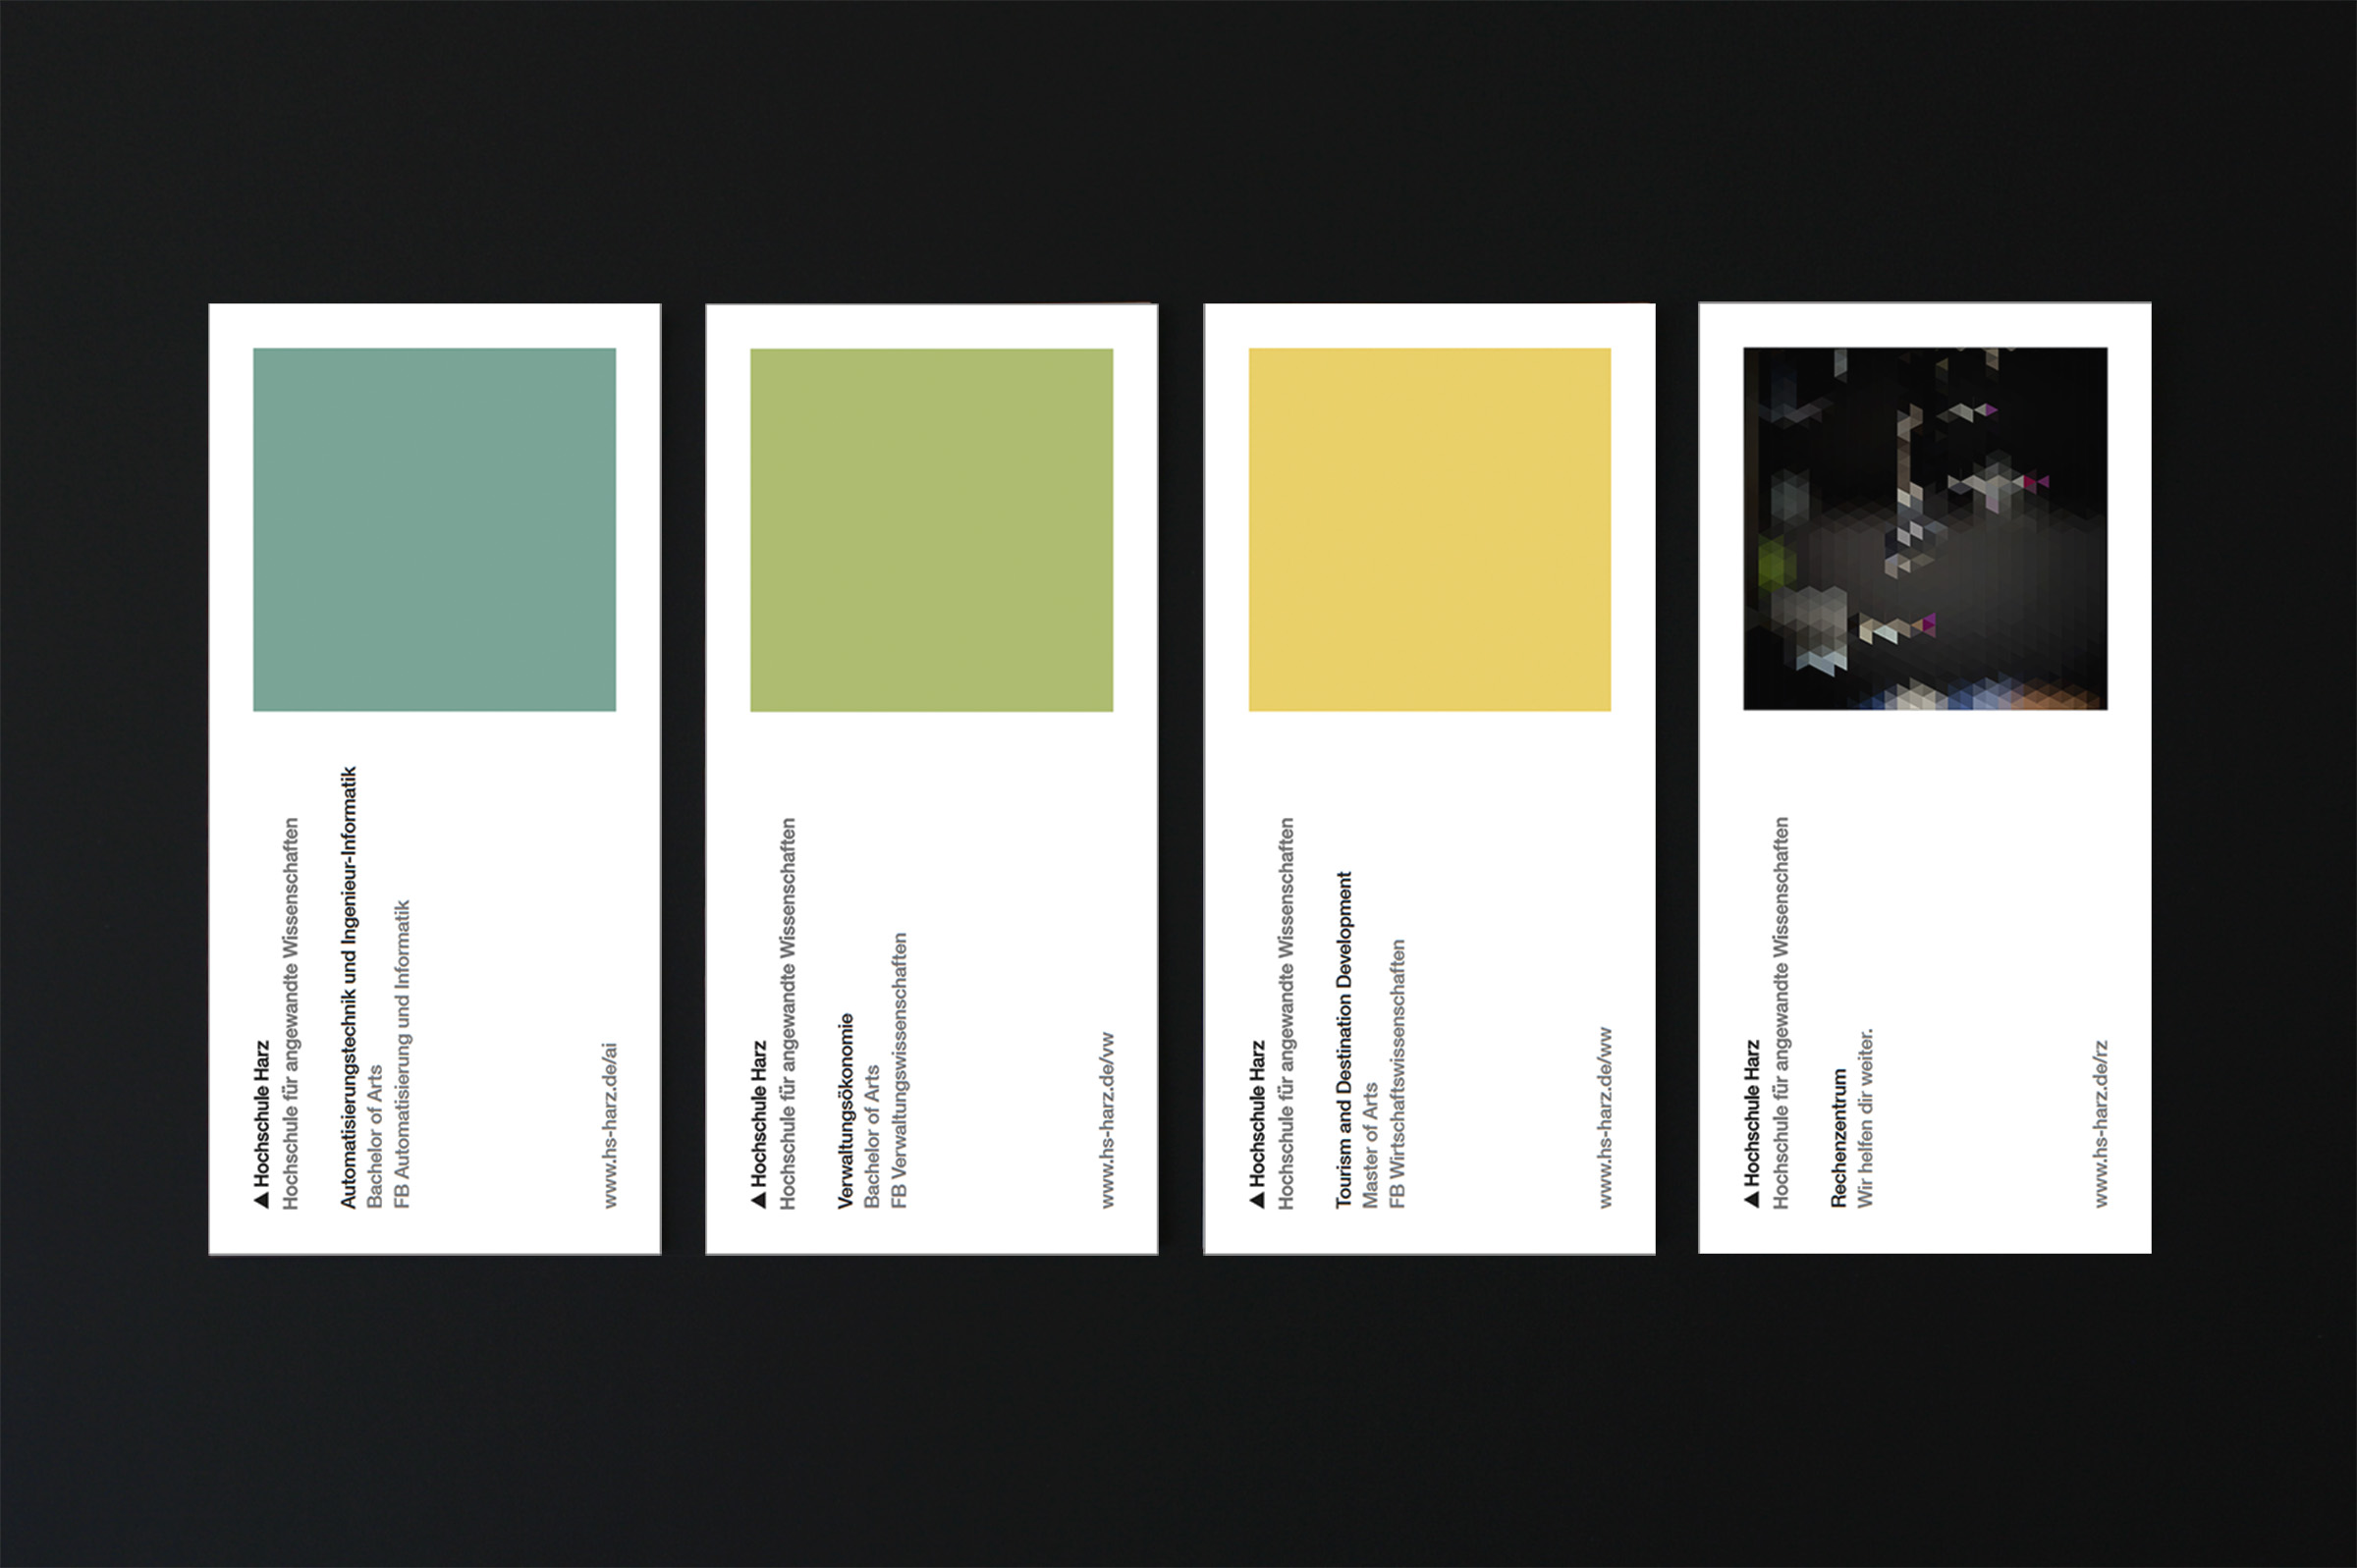 Four flyers that carry information about different study programs, displayed on black background. Each one has its own color or image.